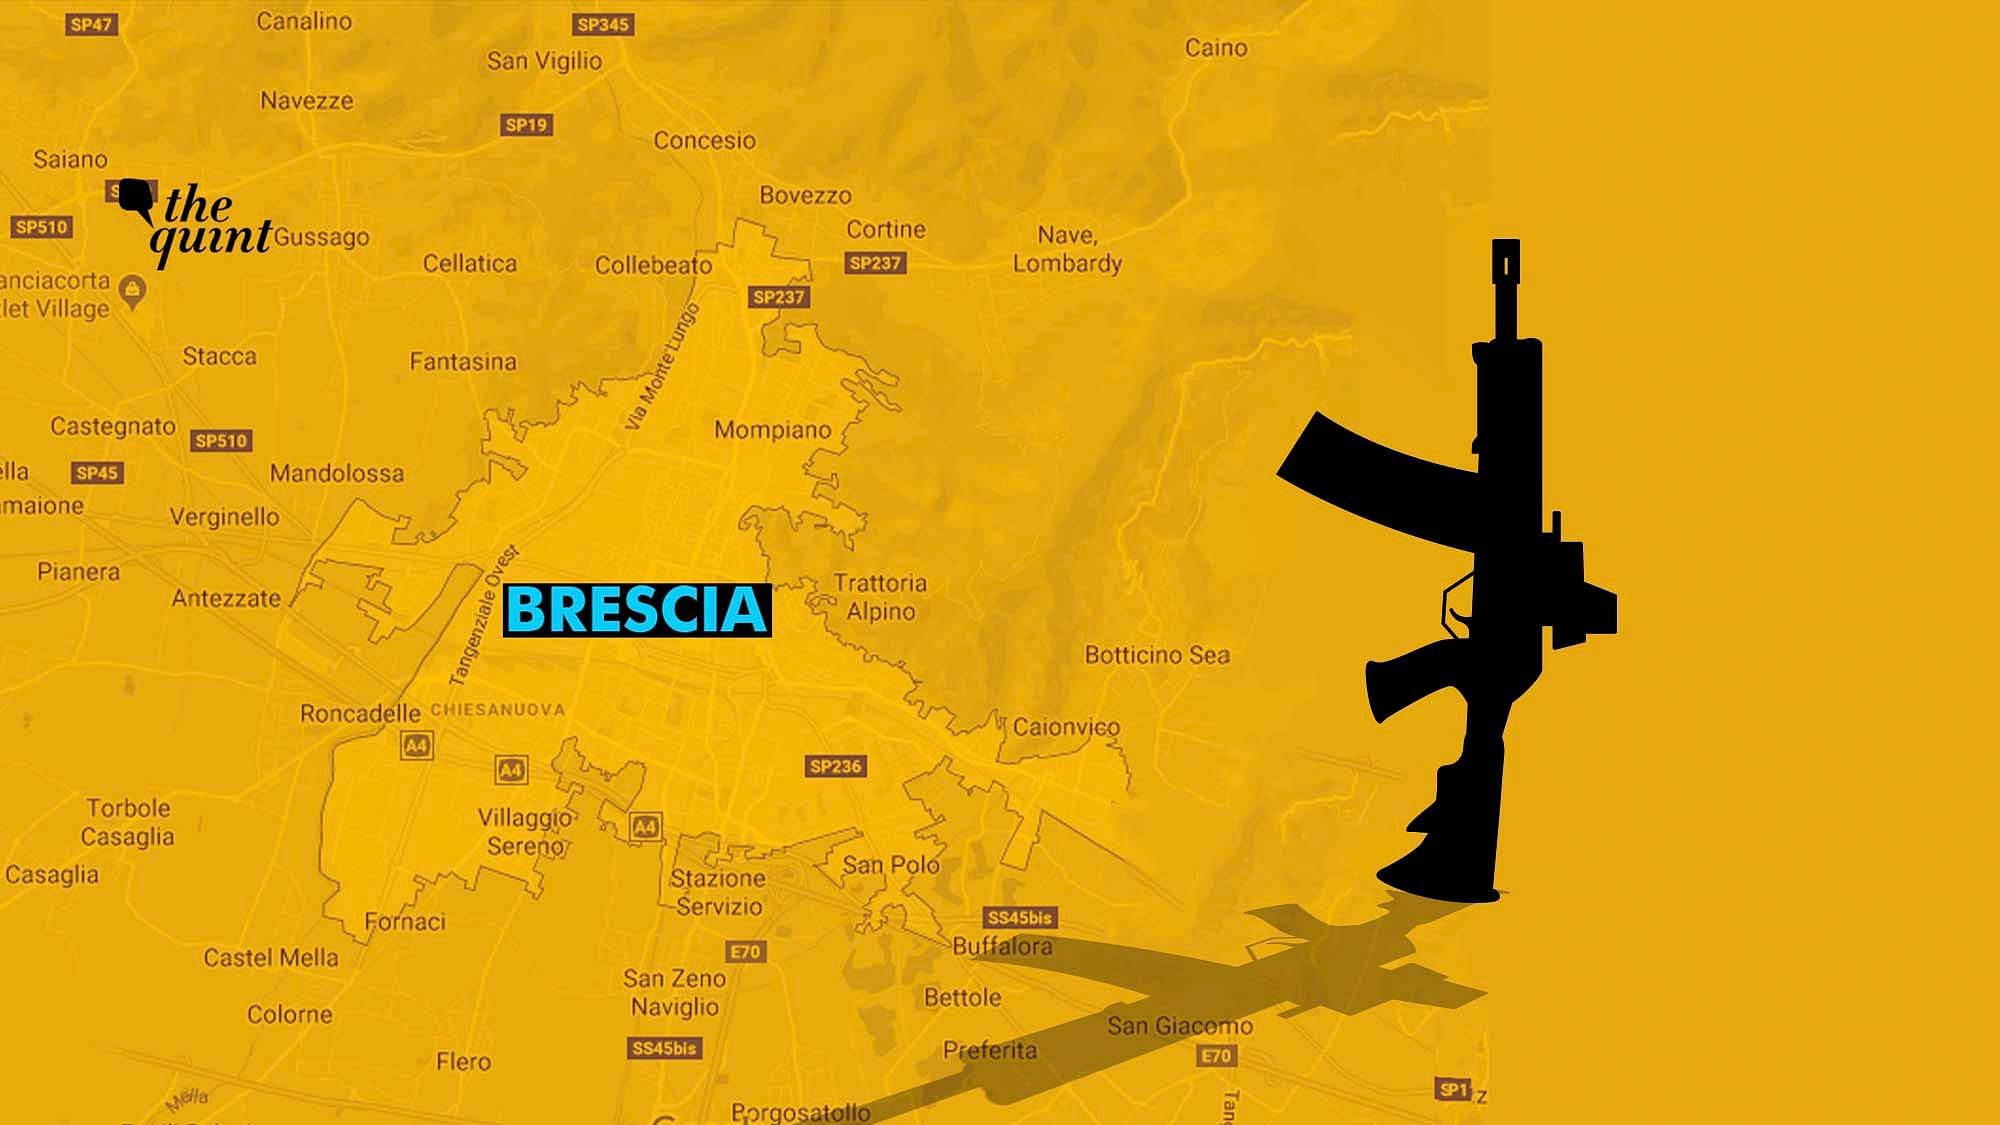 Brescia in Northern Italy, has emerged as a terror-funding epicenter. Image used for representational purposes.